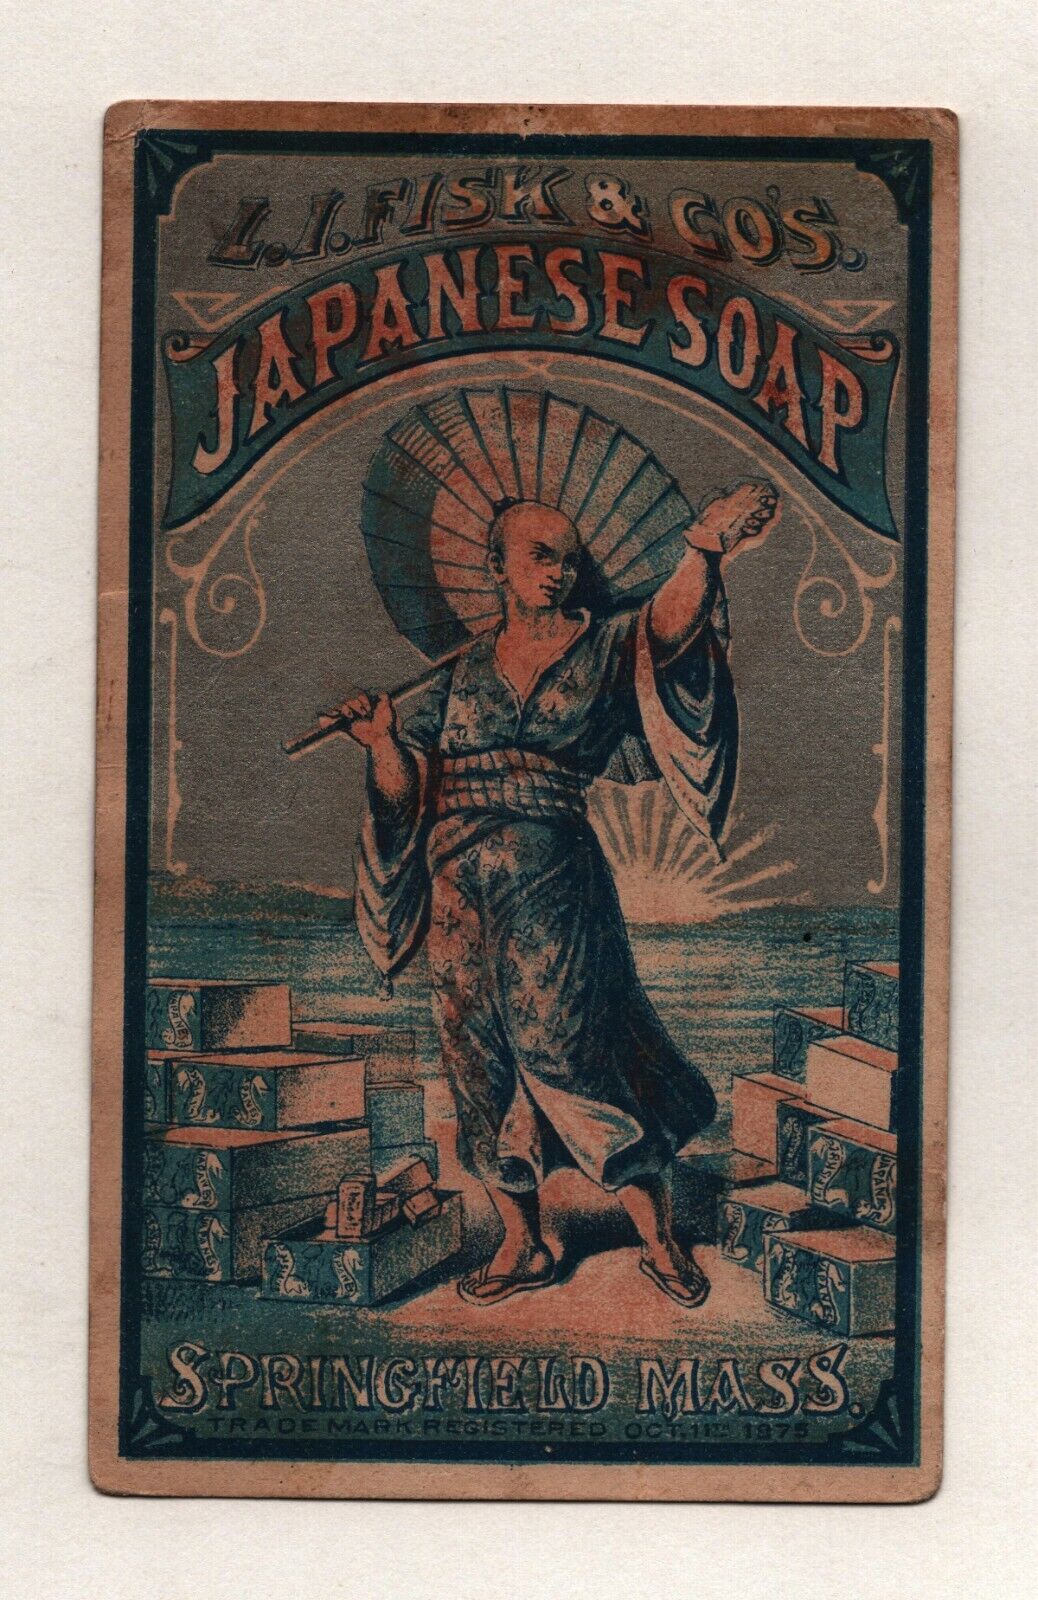 Vintage 1880\'s Victorian Trade Card L.I. Fisk & Co. Japanese Soap Springfield MA